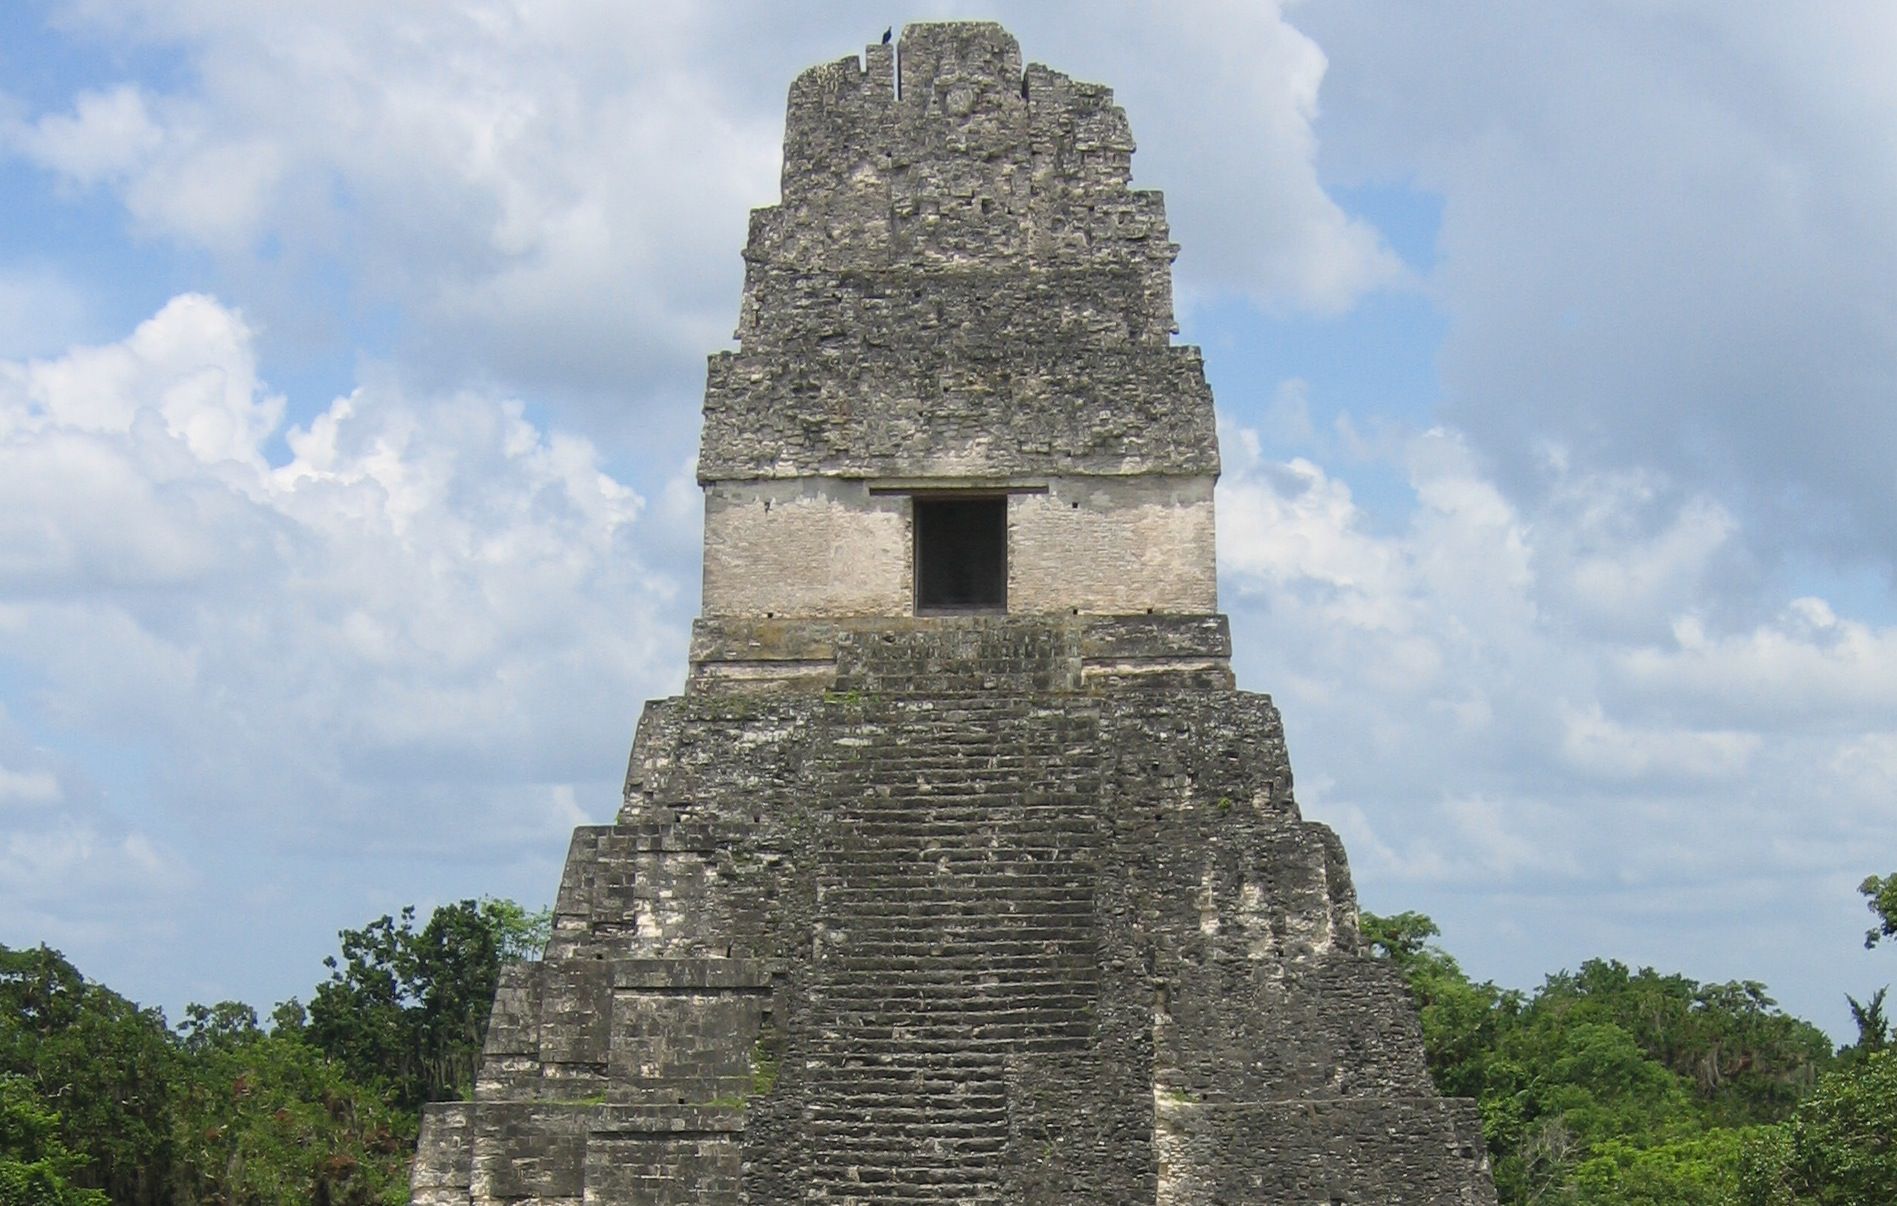 The Role of archaeoastronomy in the Maya World: the case study of